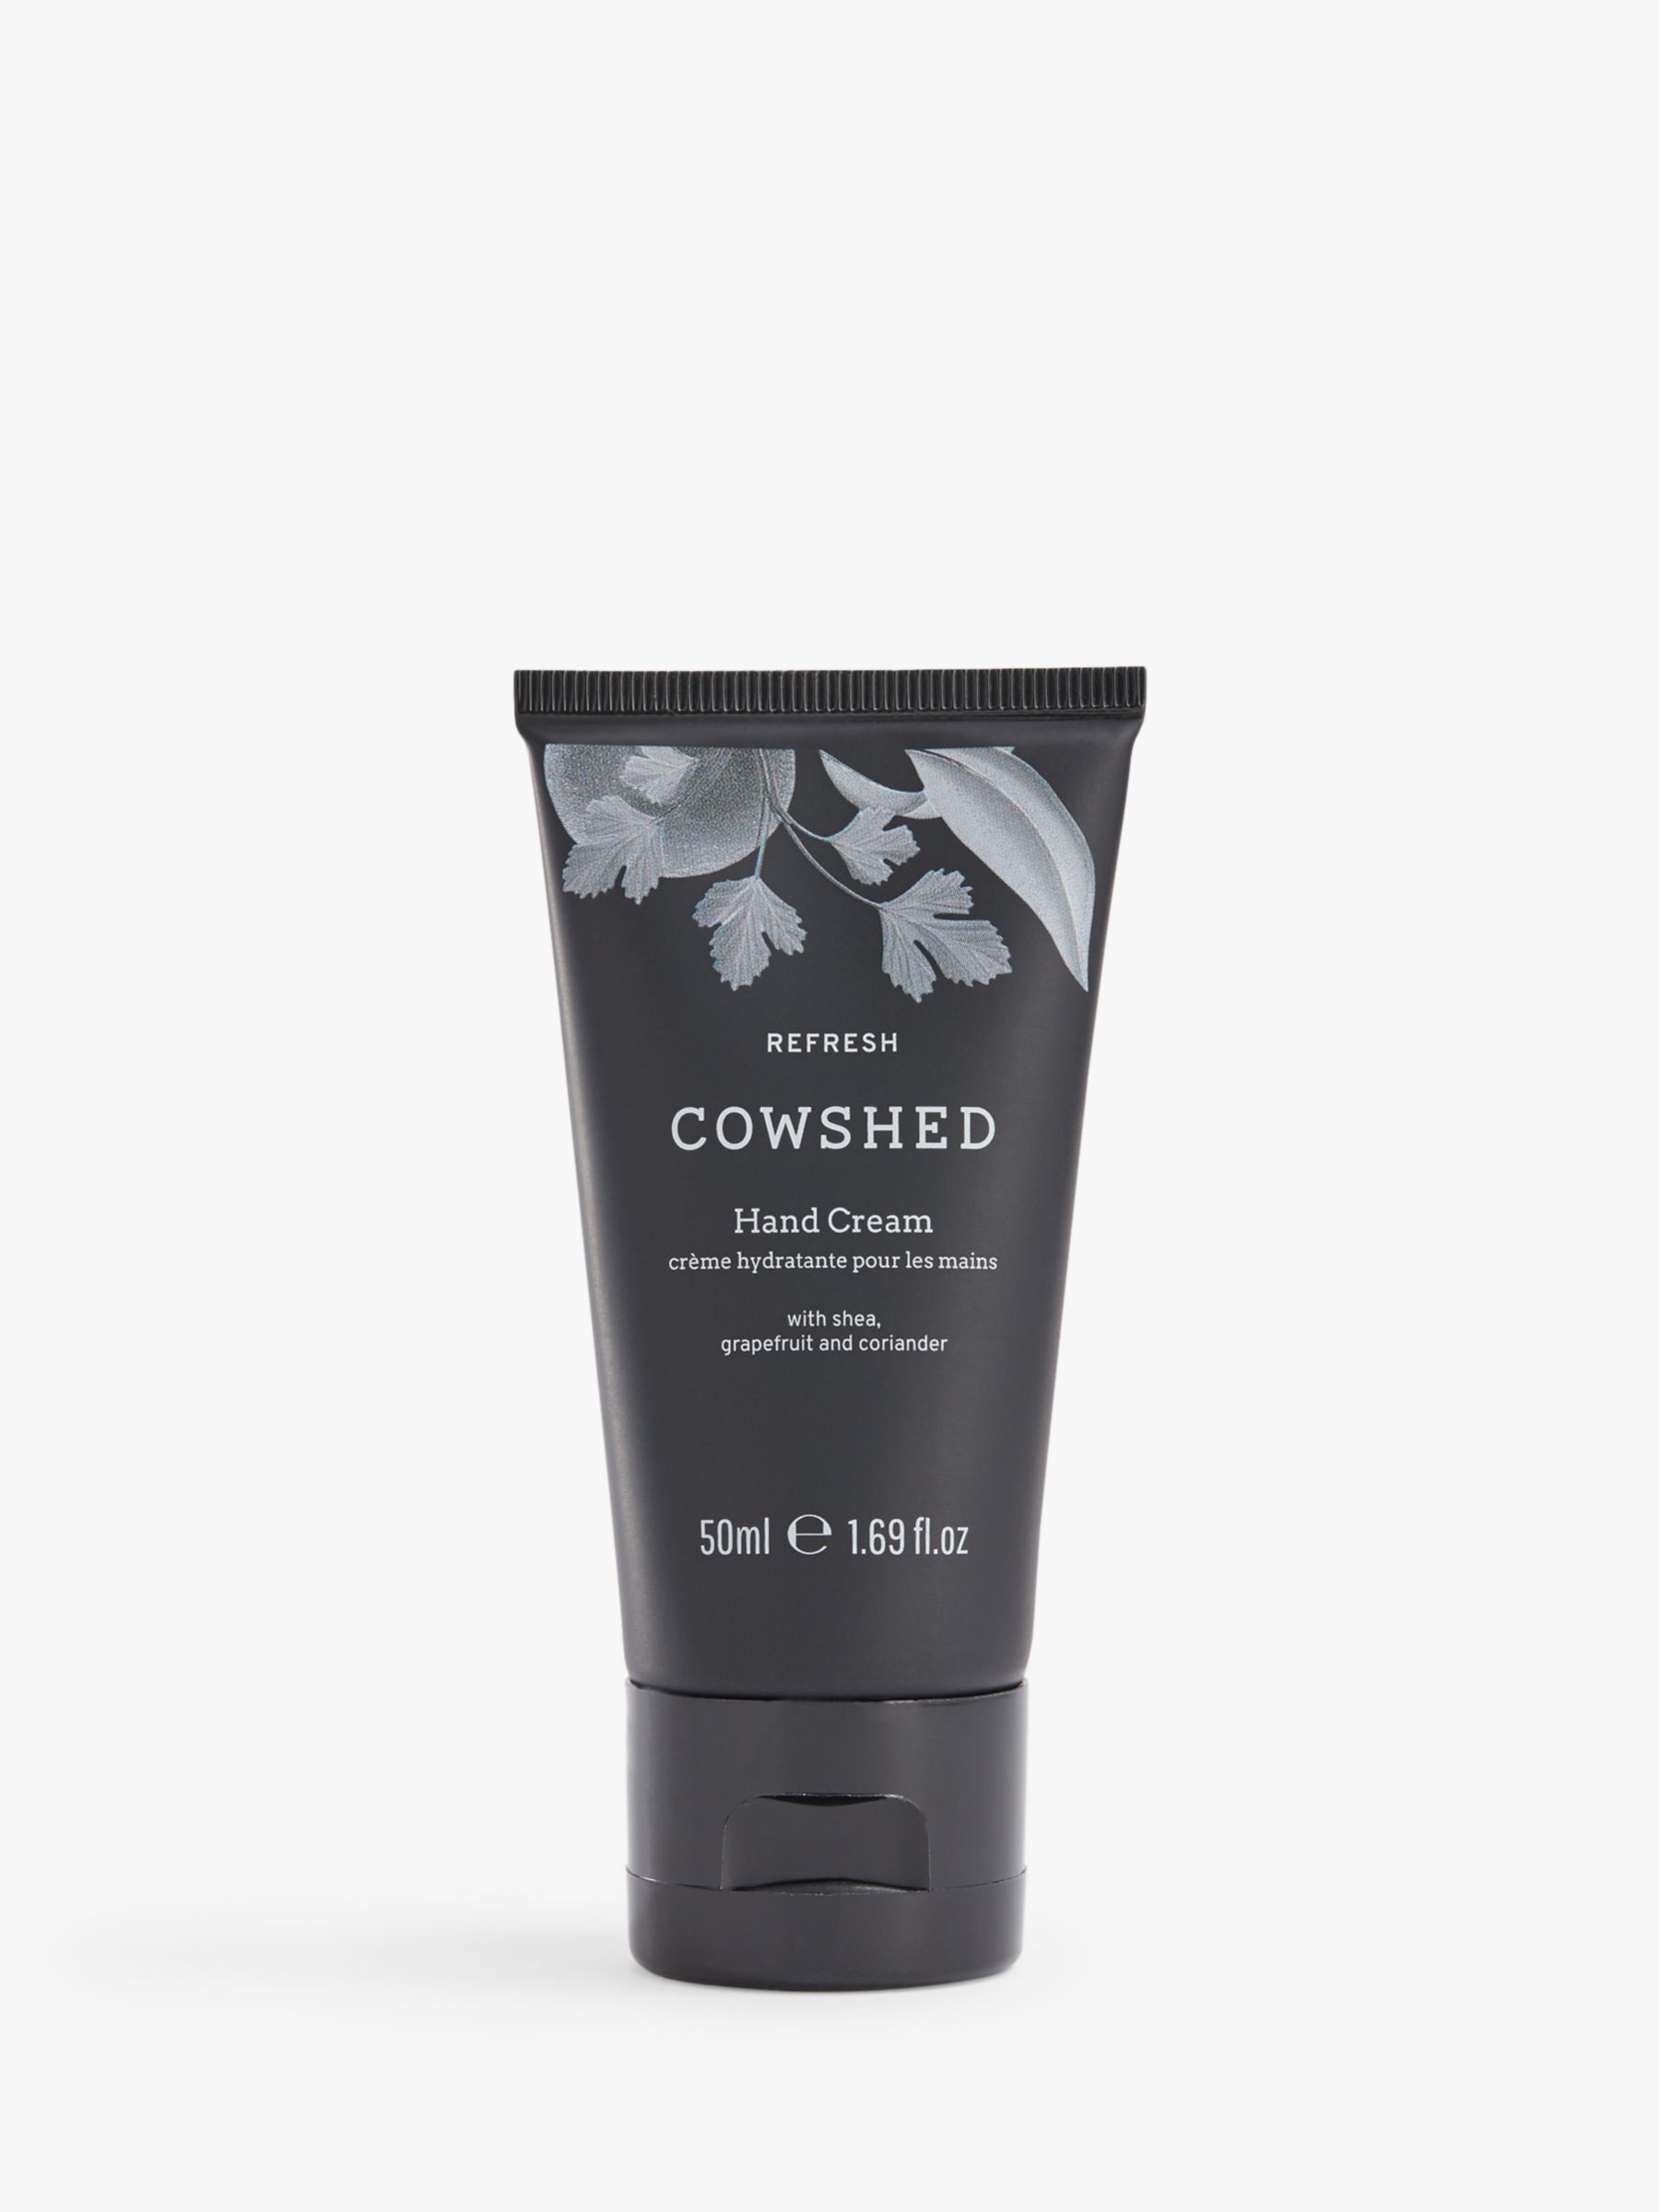 Cowshed Refresh Hand Cream, 50ml 1